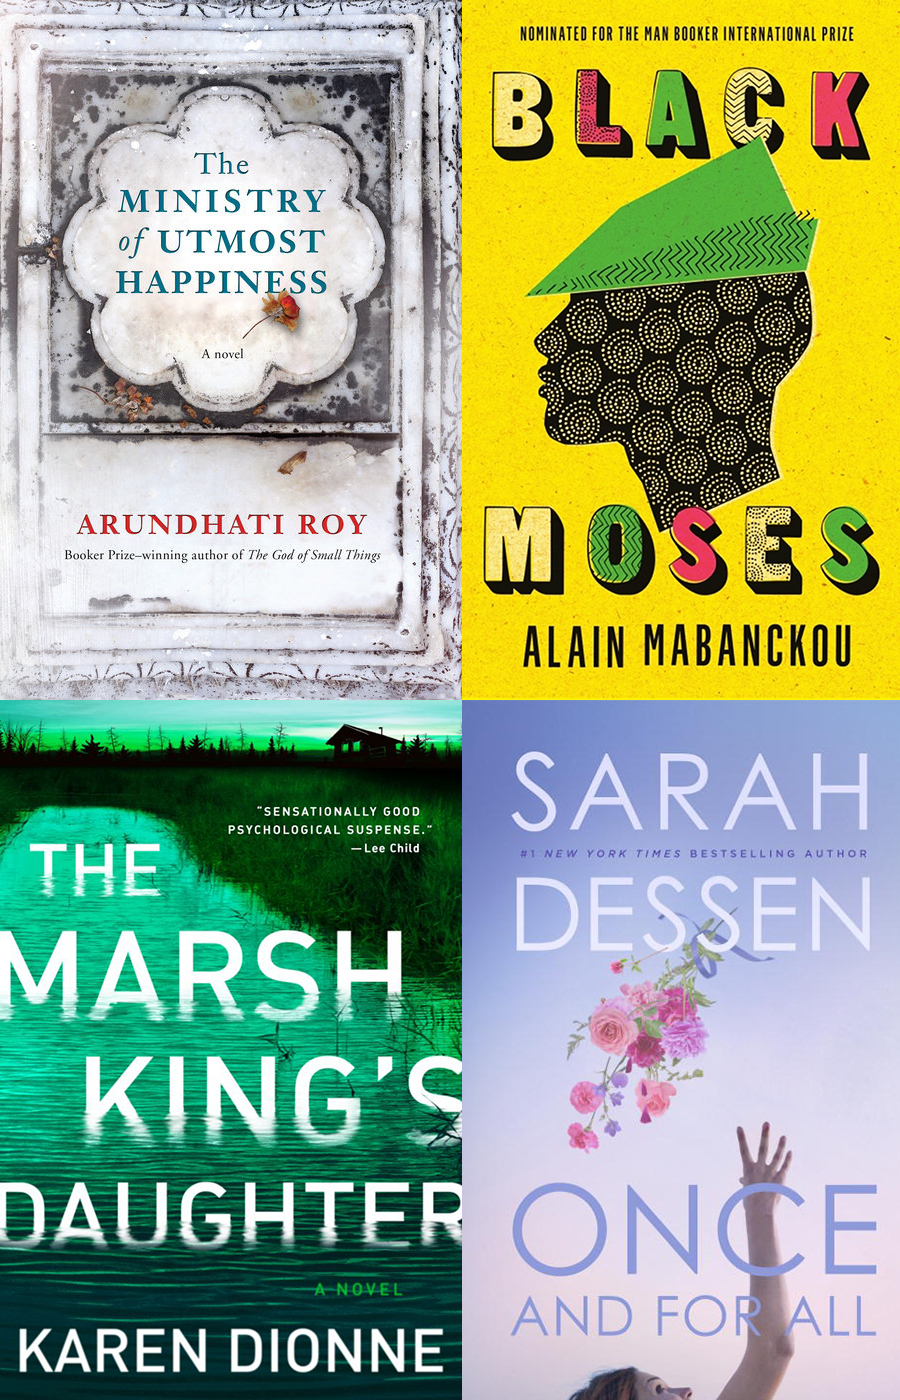 What were popular novels in 2014?